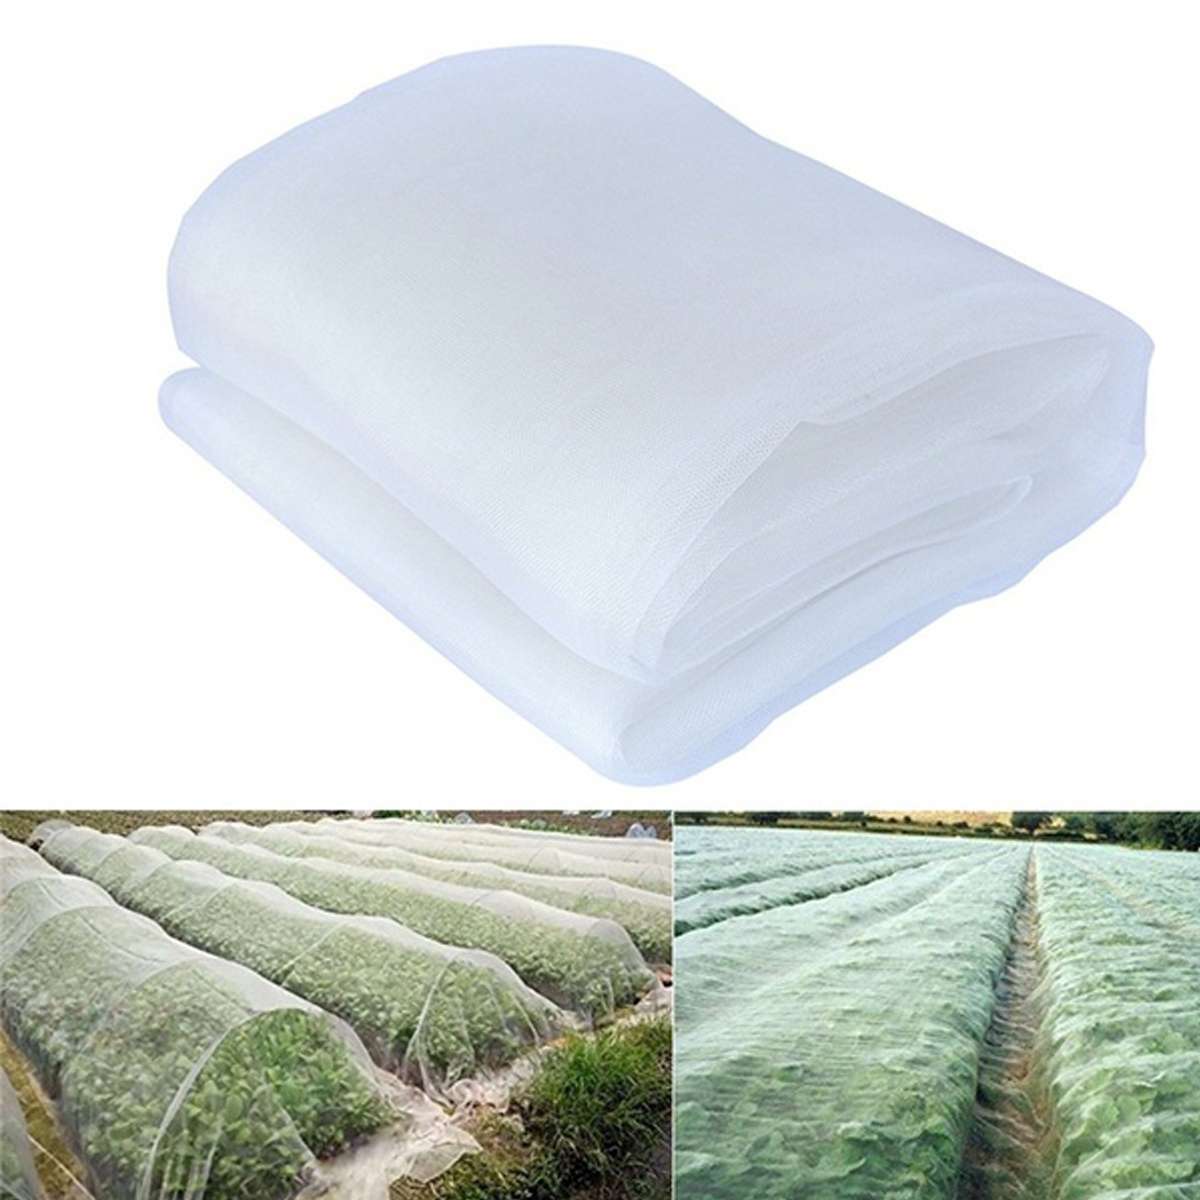 Large Greenhouse Protective Net Fruit Vegetables Care Cover Anti Insect Pest Fly Net Garden Pest Control Plant Covers Net